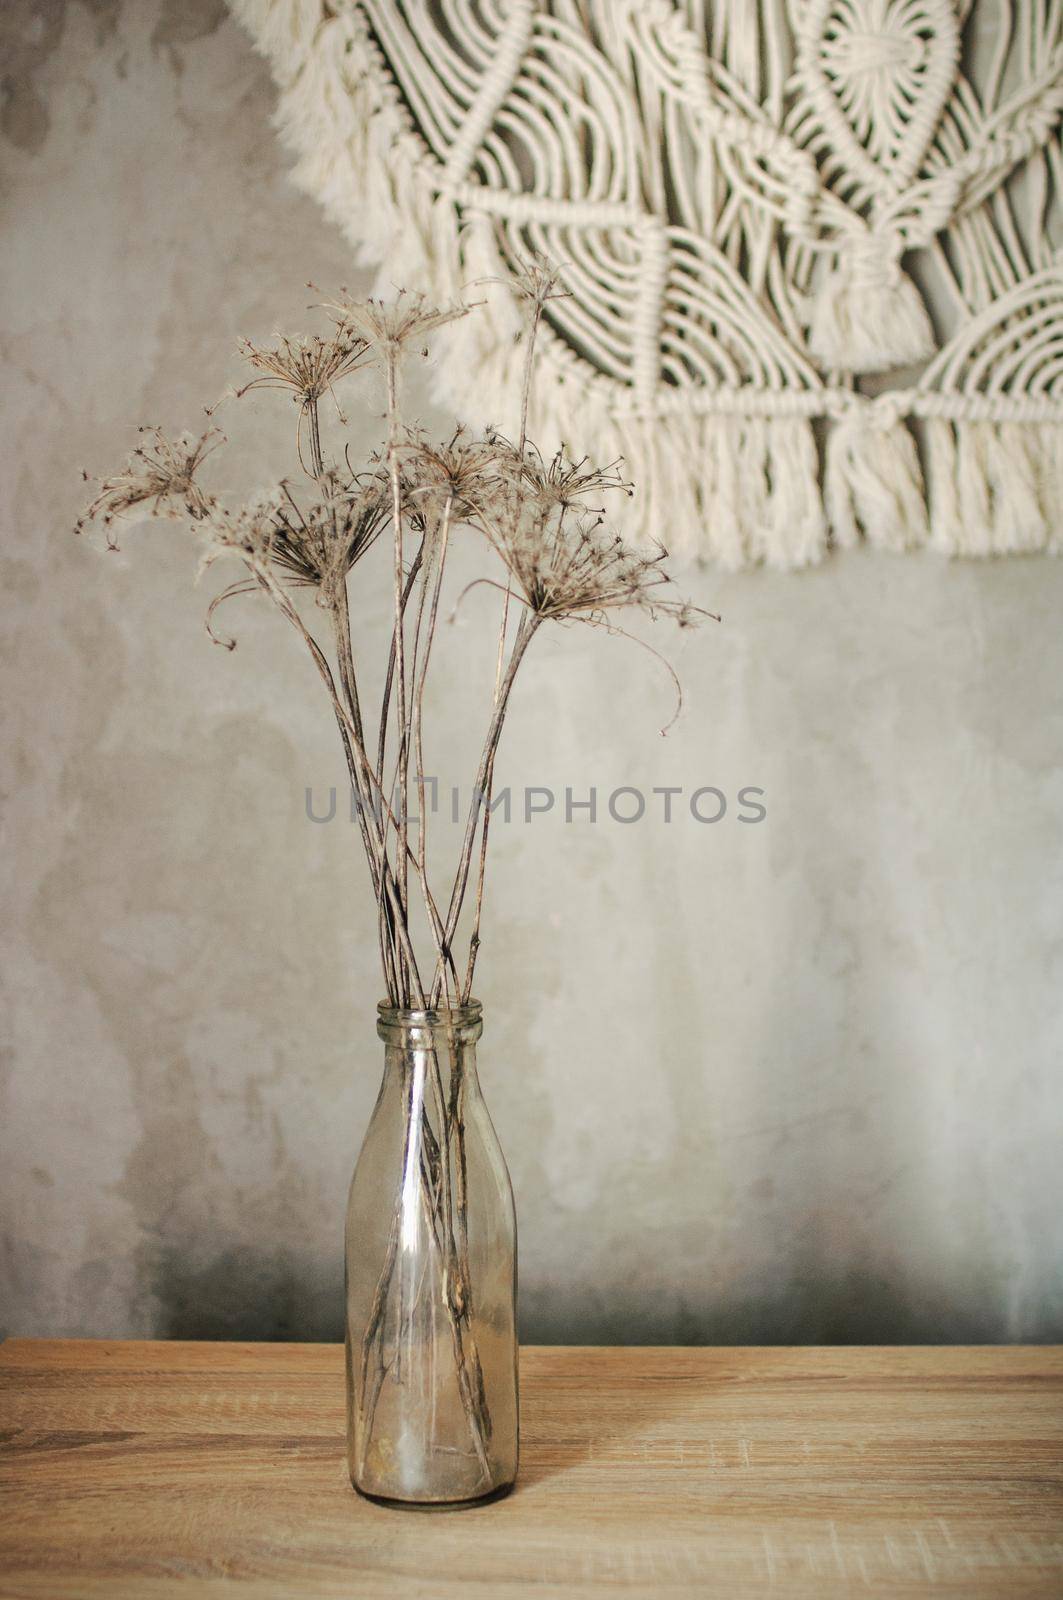 dry flowers braided with cobwebs on a brick wall background by ozornina